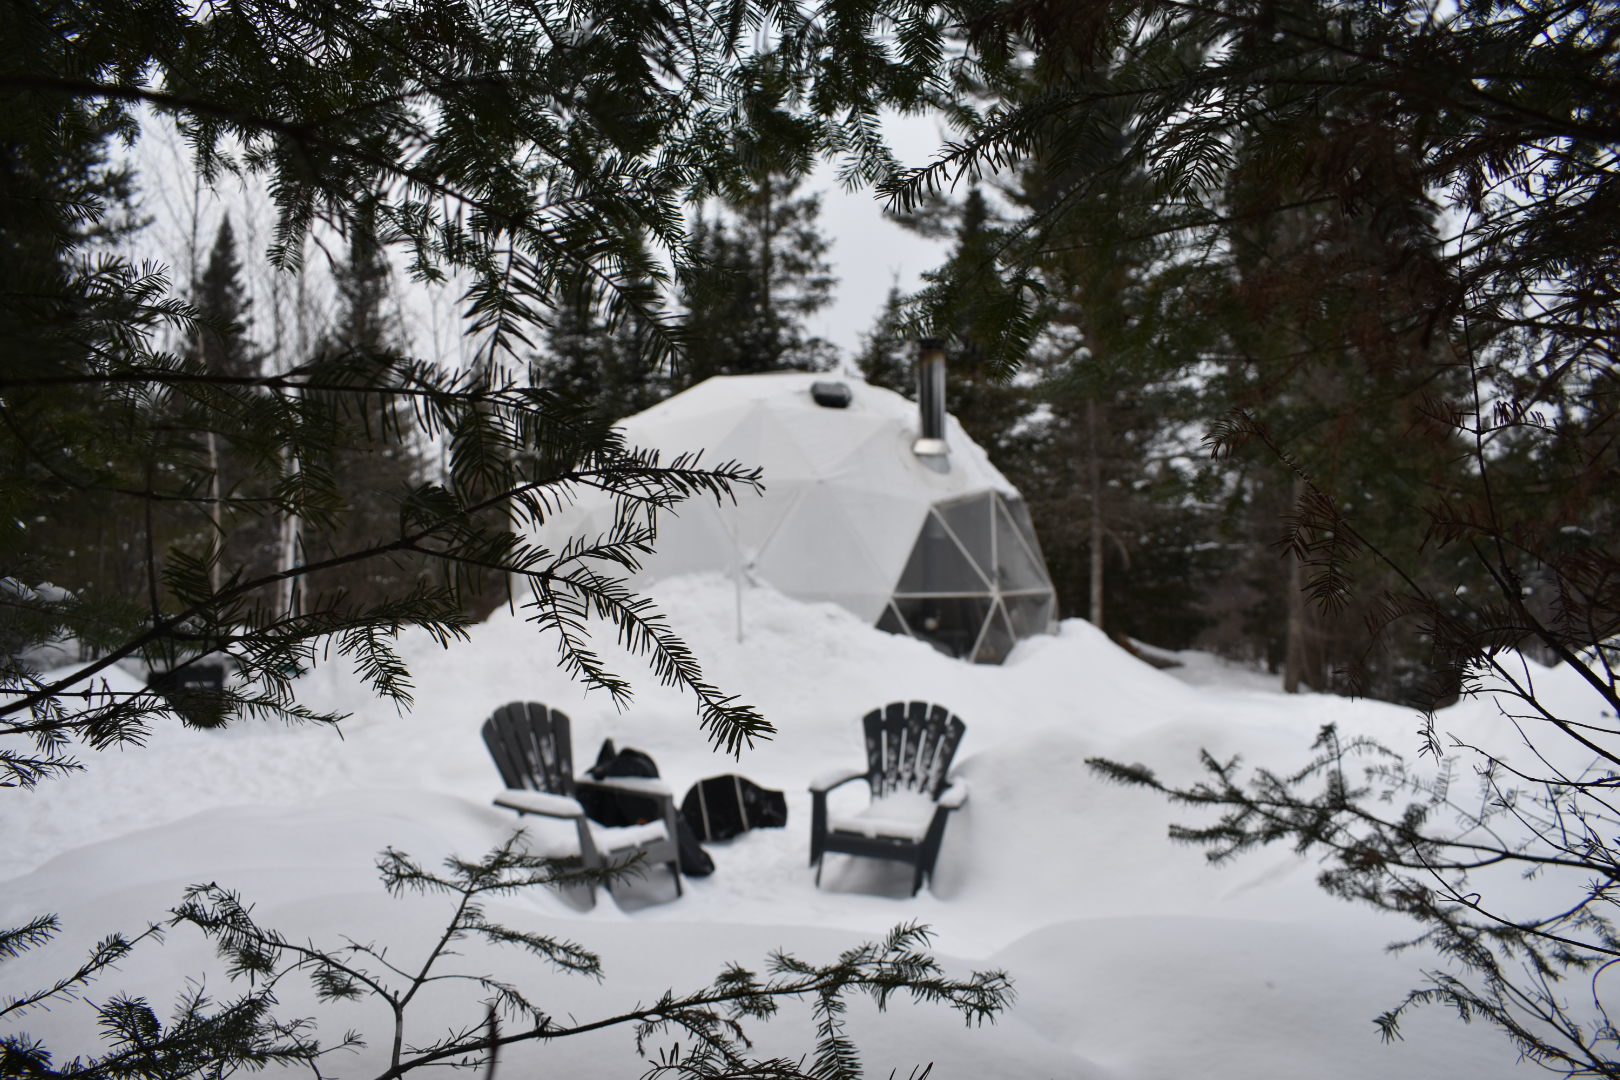 snowy glamping dome in the forest